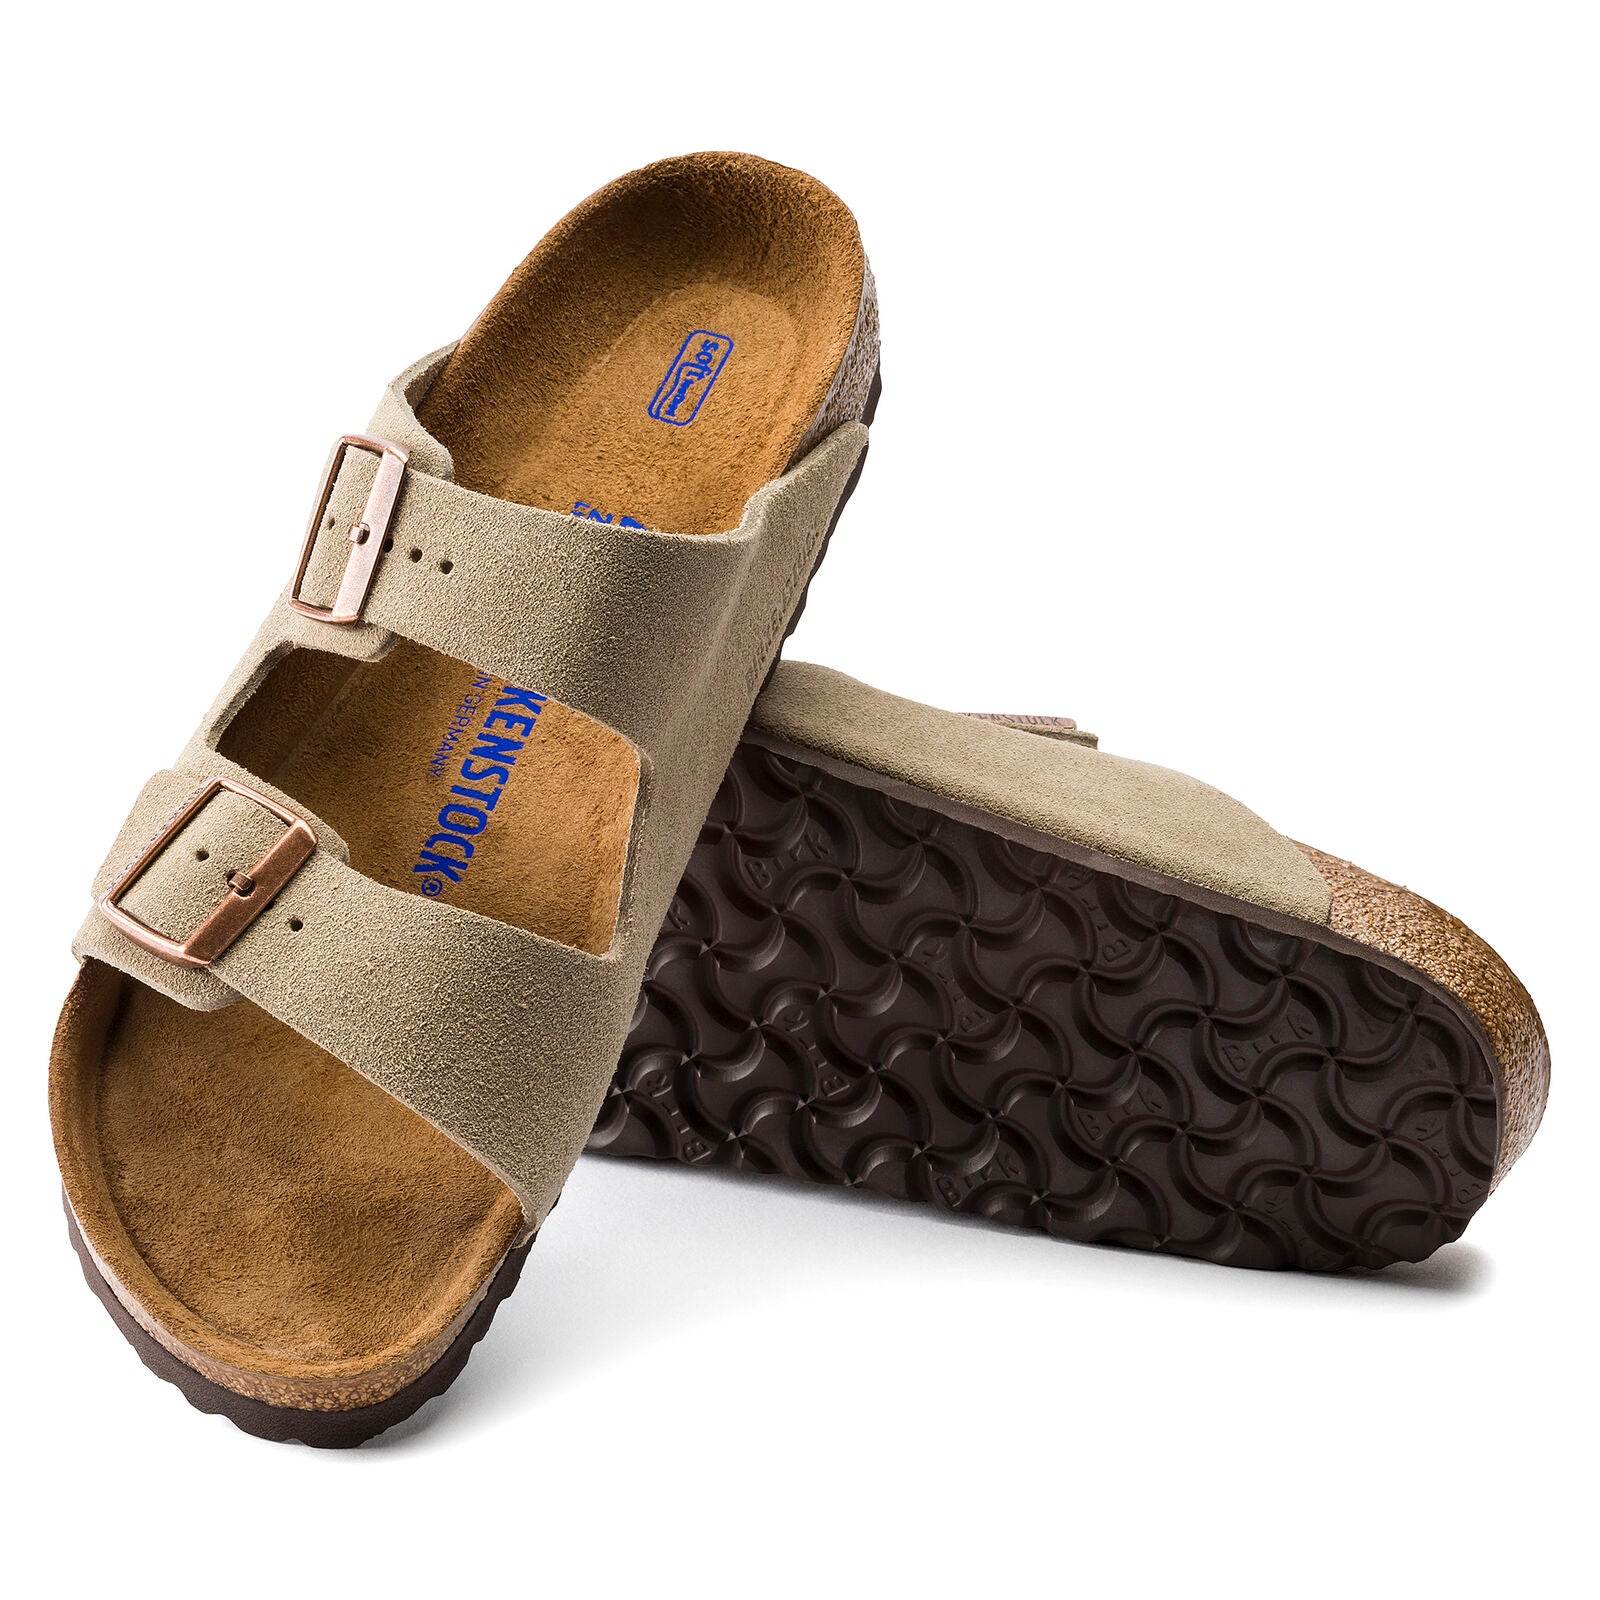 BIRKENSTOCK Arizona Women's Taupe Suede, Soft Footbed Two Strap Sandal